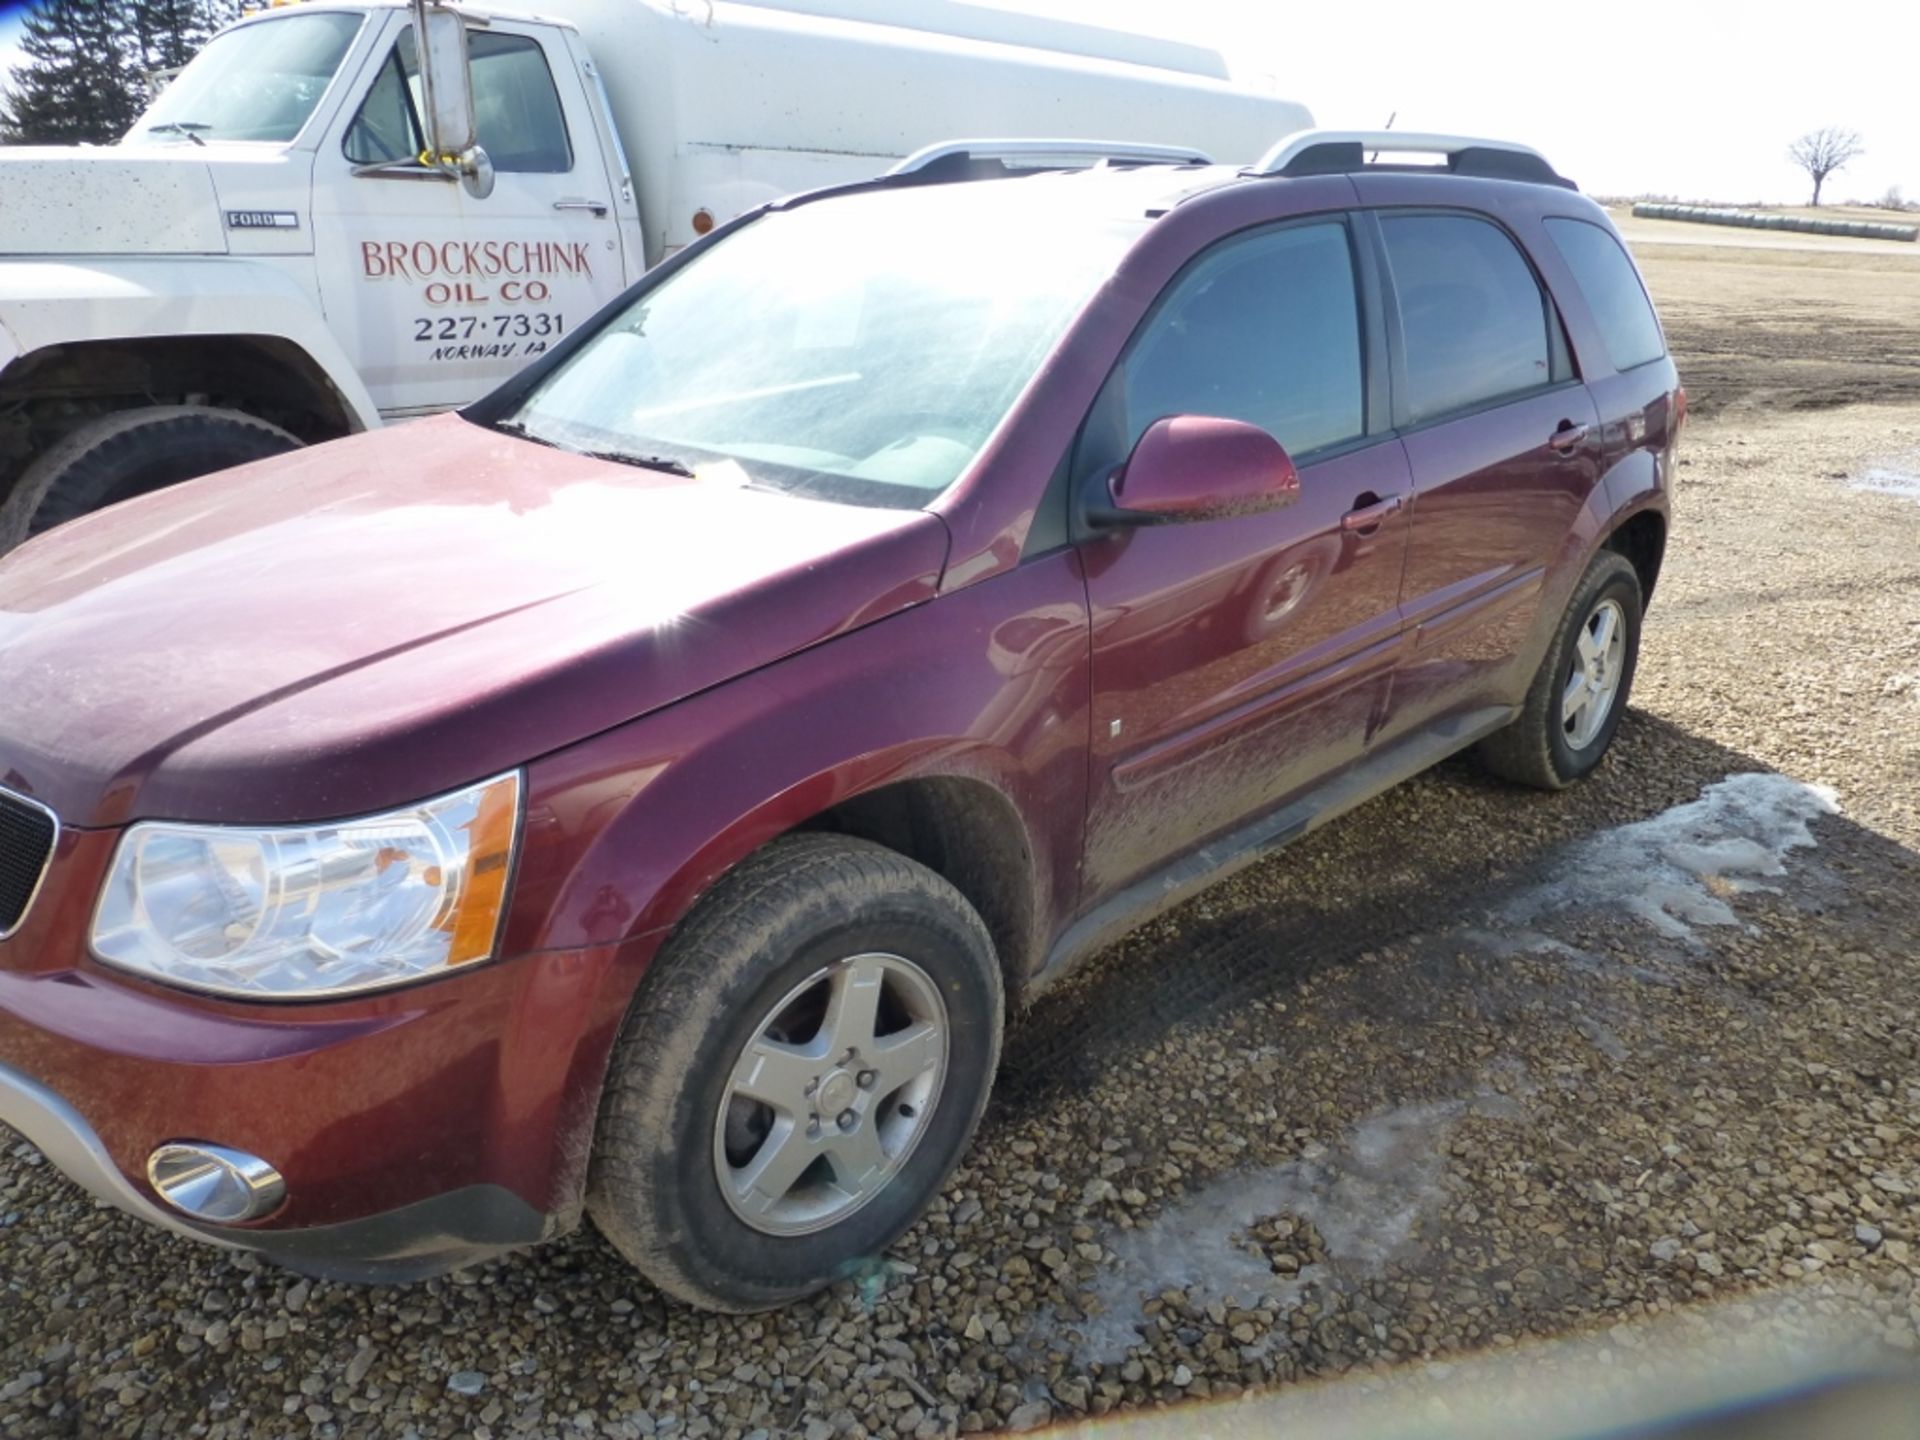 2009 Pontiac Torrent, 130,131 unverified miles. Automatic, AWD, runs and drives, check engine and